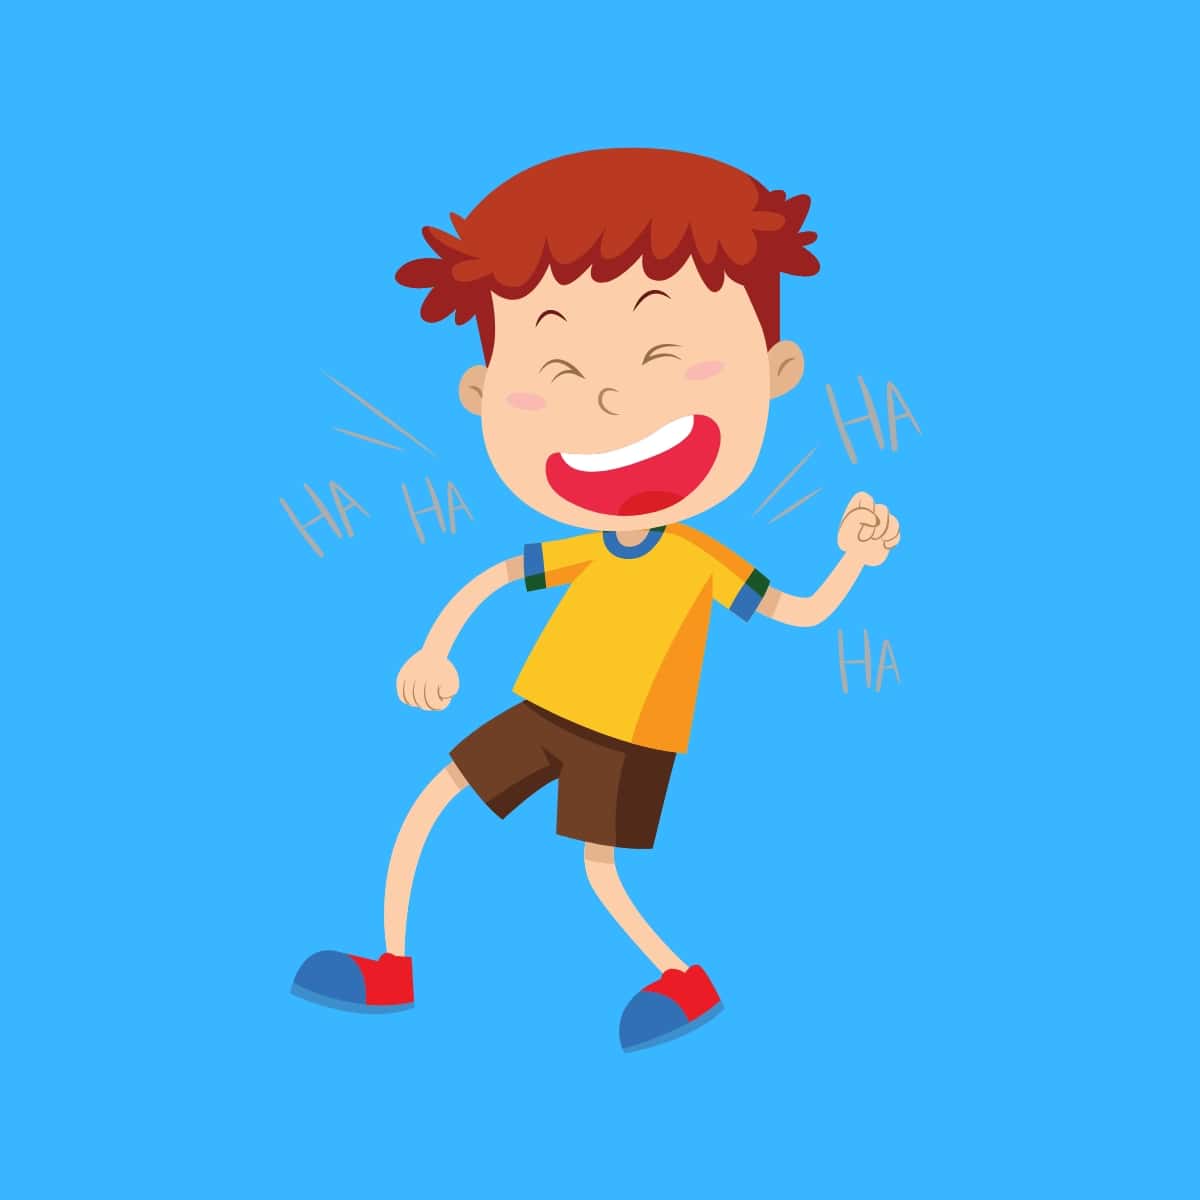 Cartoon graphic of a boy laughing at very funny jokes on a blue background.